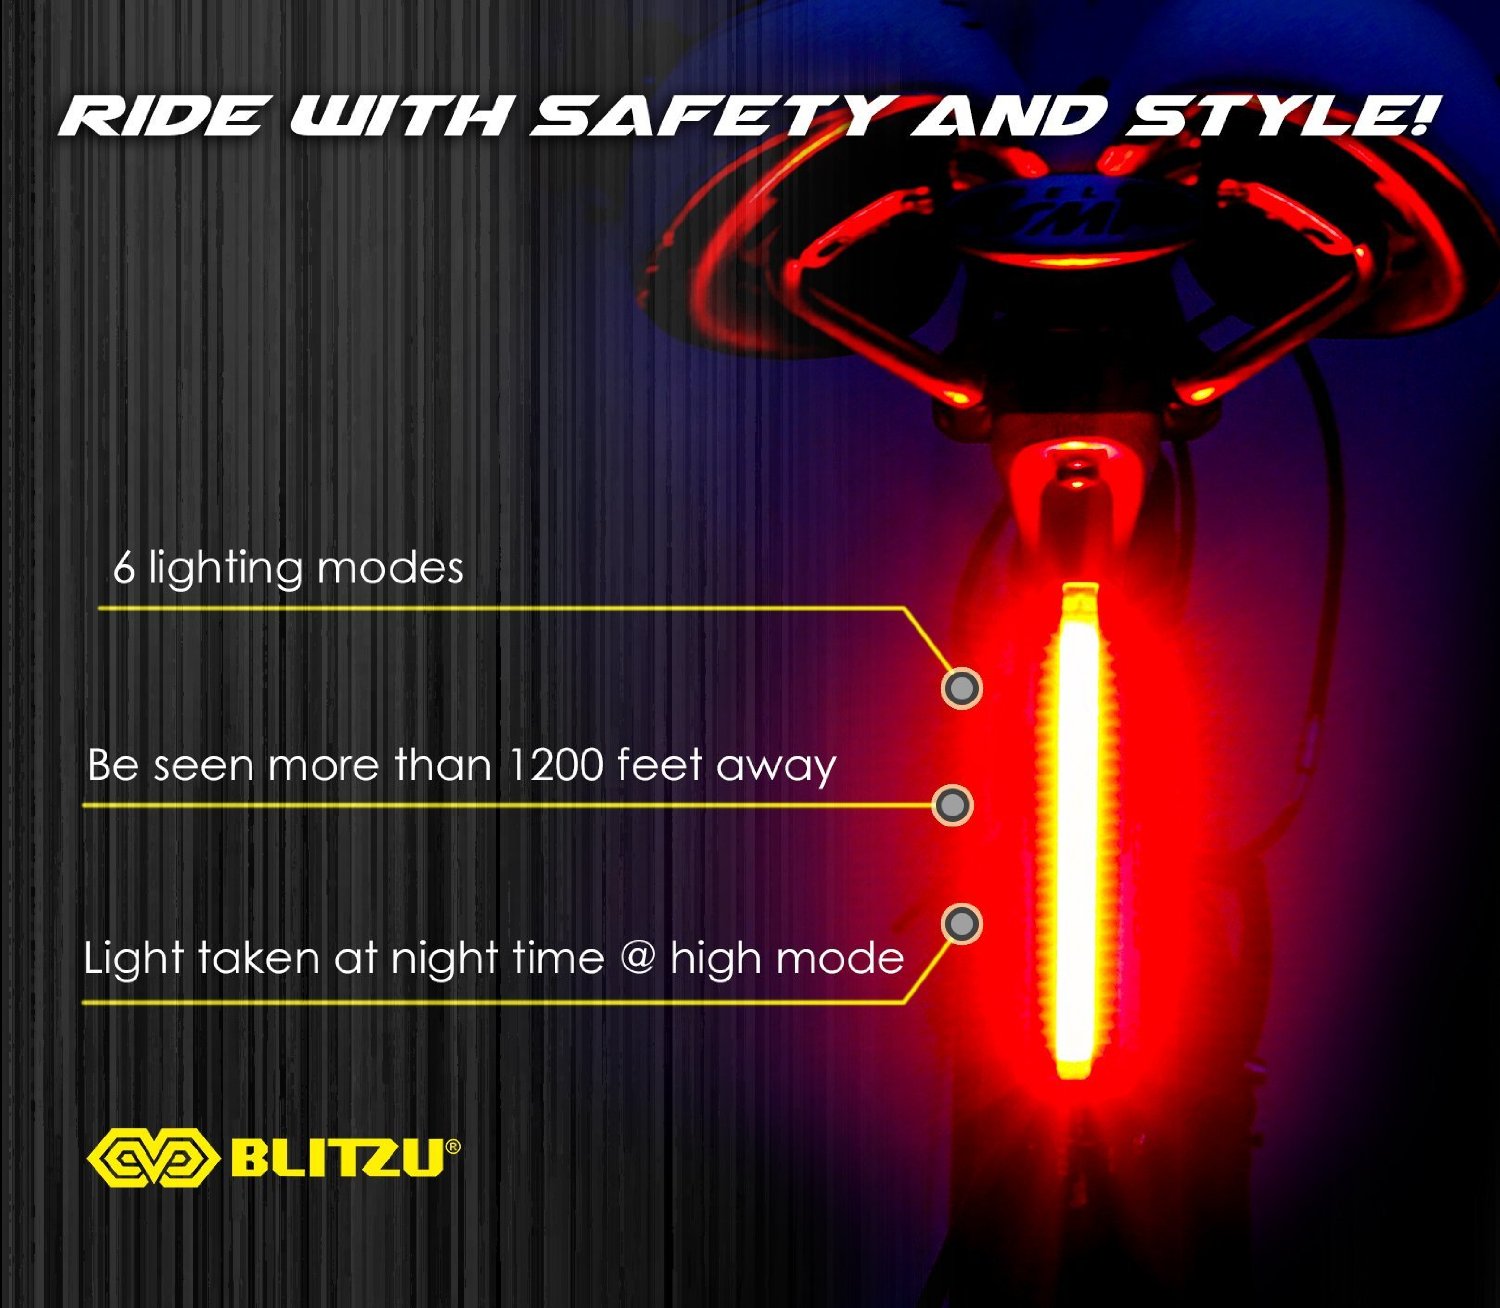 Helmet Light ELECFUN USB Rechargeable LED Bike Tail Light Fits on Any Bikes Easily Clips On Backpacks Red High Intensity Cycling Safety Flashlight Helmets 5 Modes Bright Bicycle Rear Light